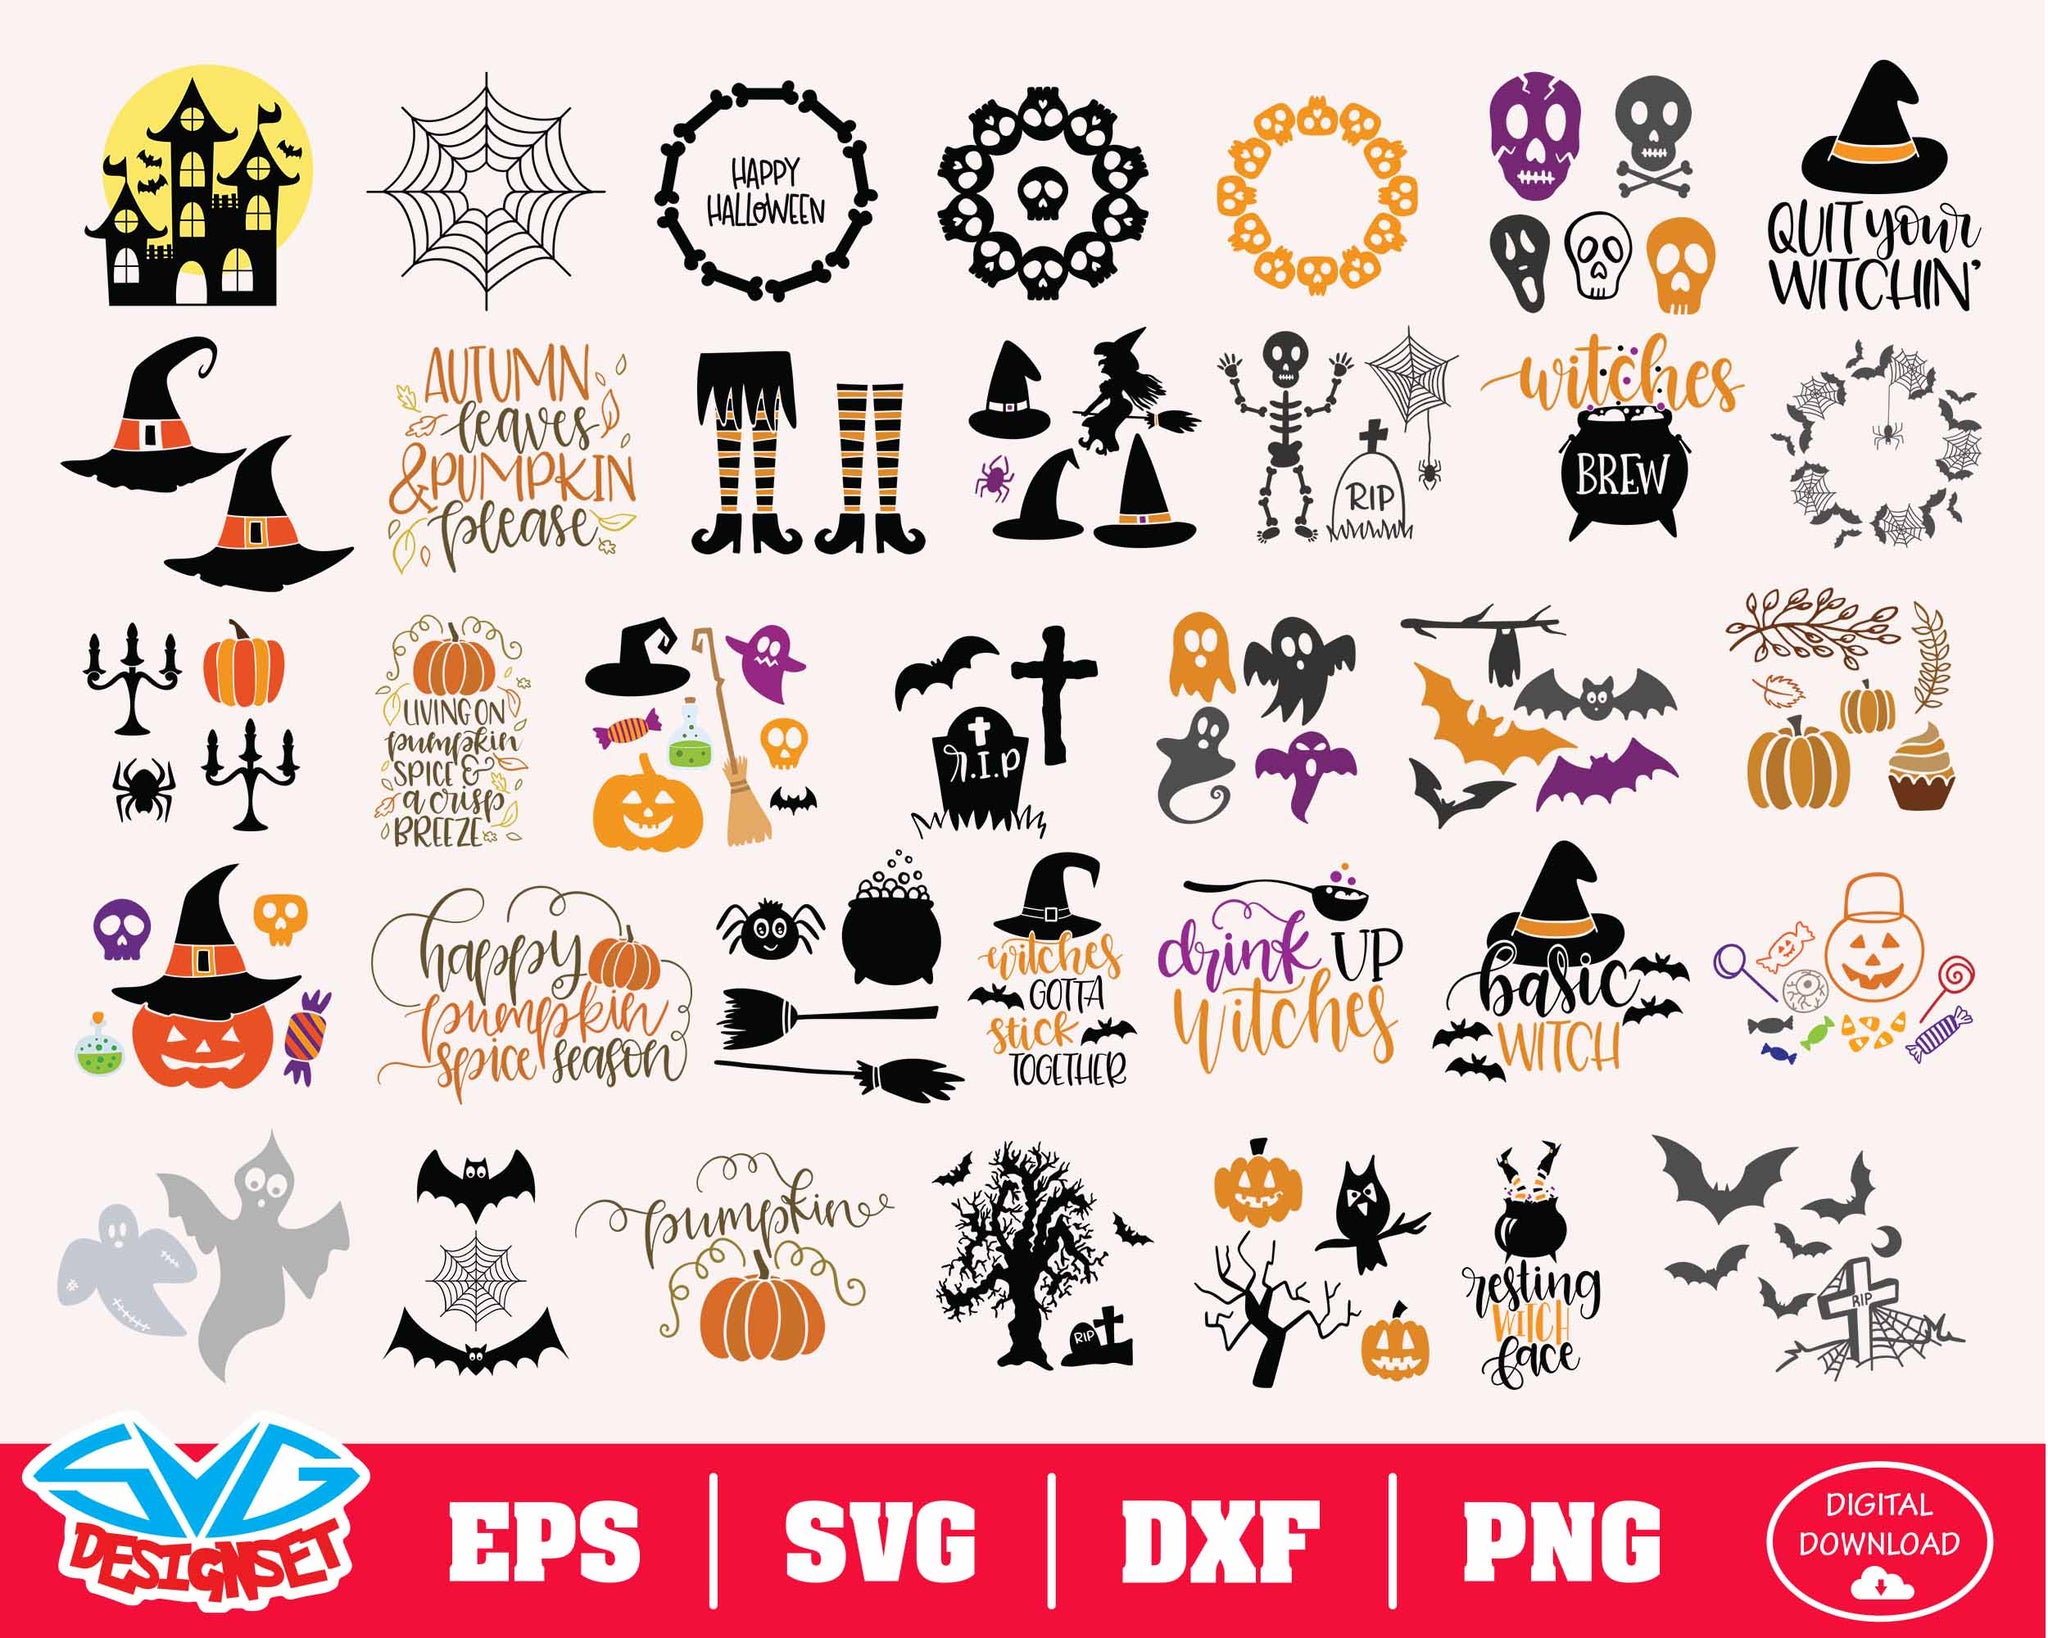 Download Halloween Bundle Svg, Dxf, Eps, Png, Clipart, Silhouette ...